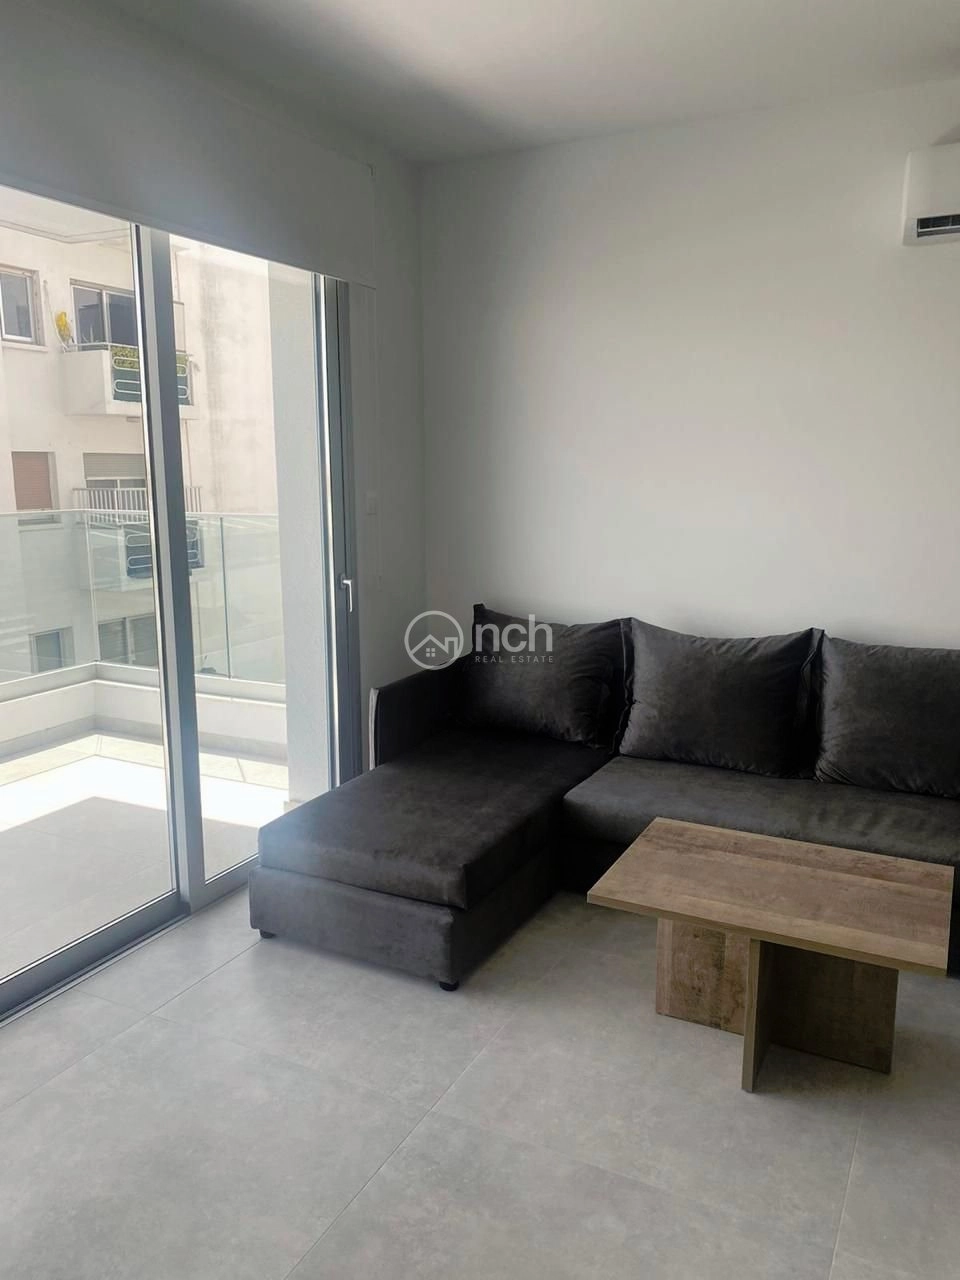 1 Bedroom Apartment for Rent in Strovolos – Chryseleousa, Nicosia District